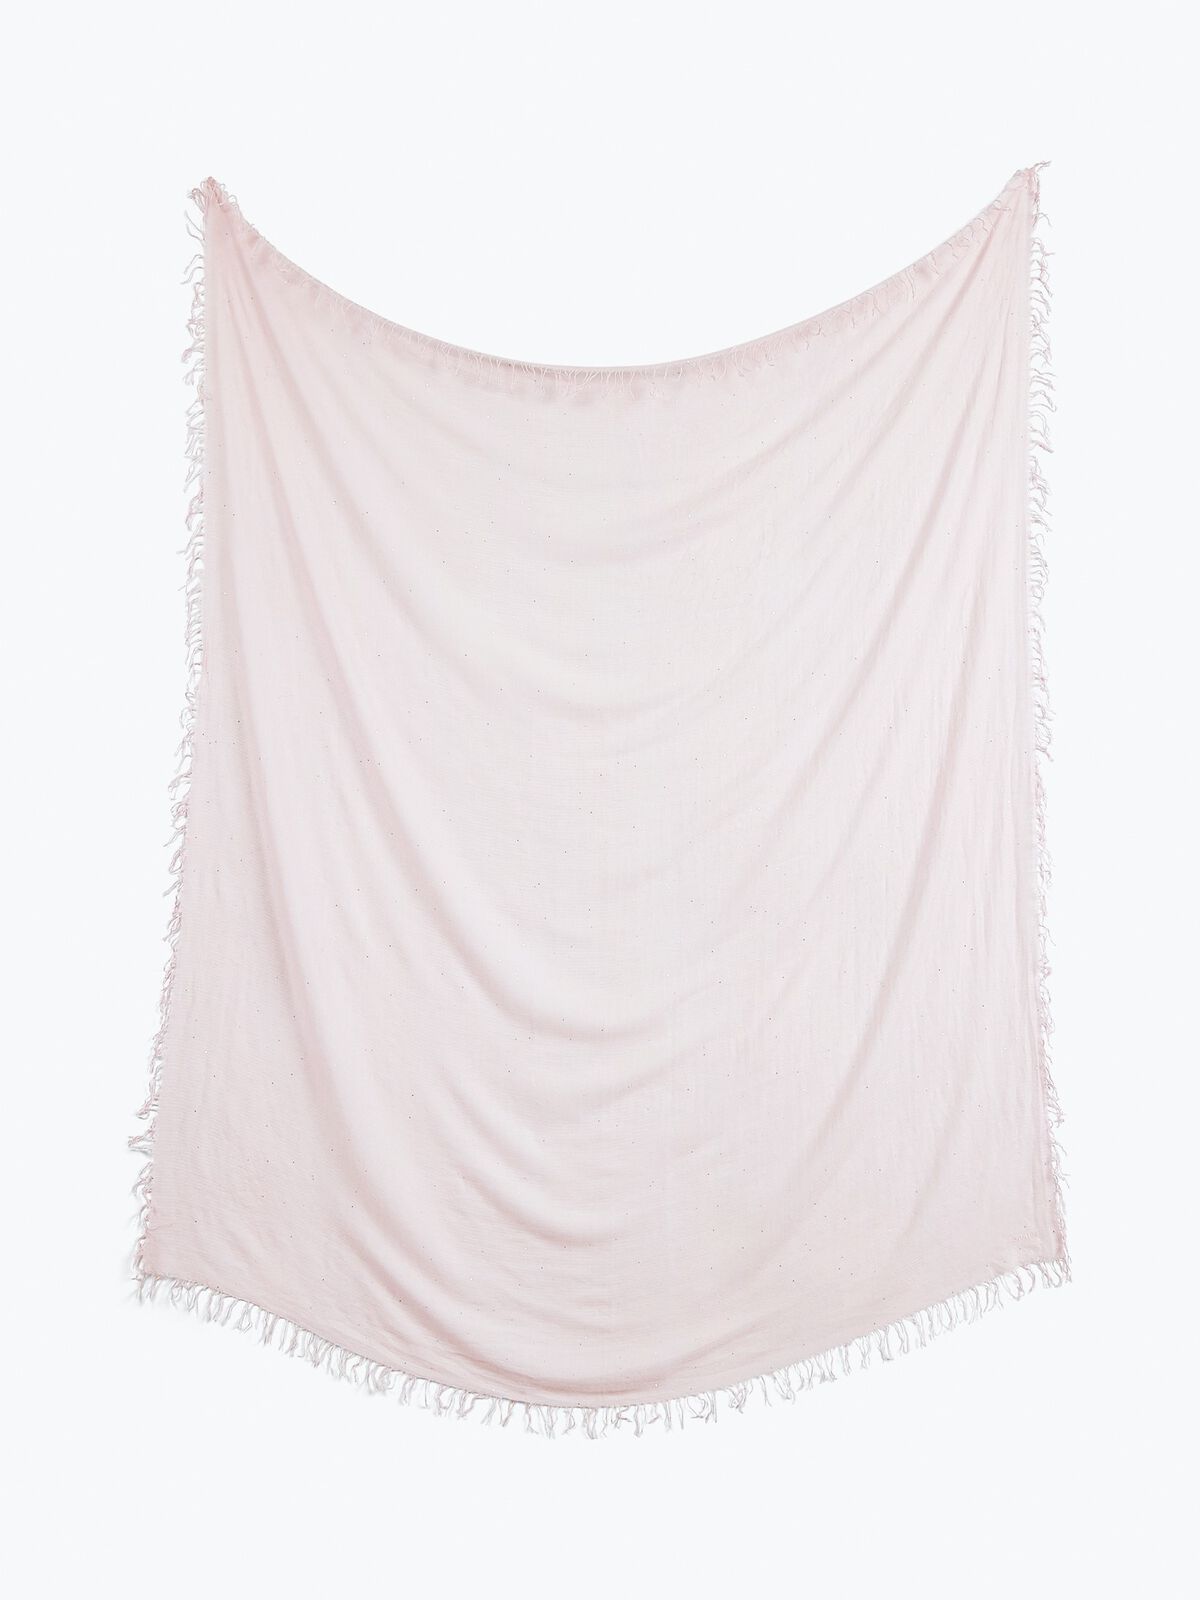 CHAN LUU SCATTERED SEQUIN SCARF